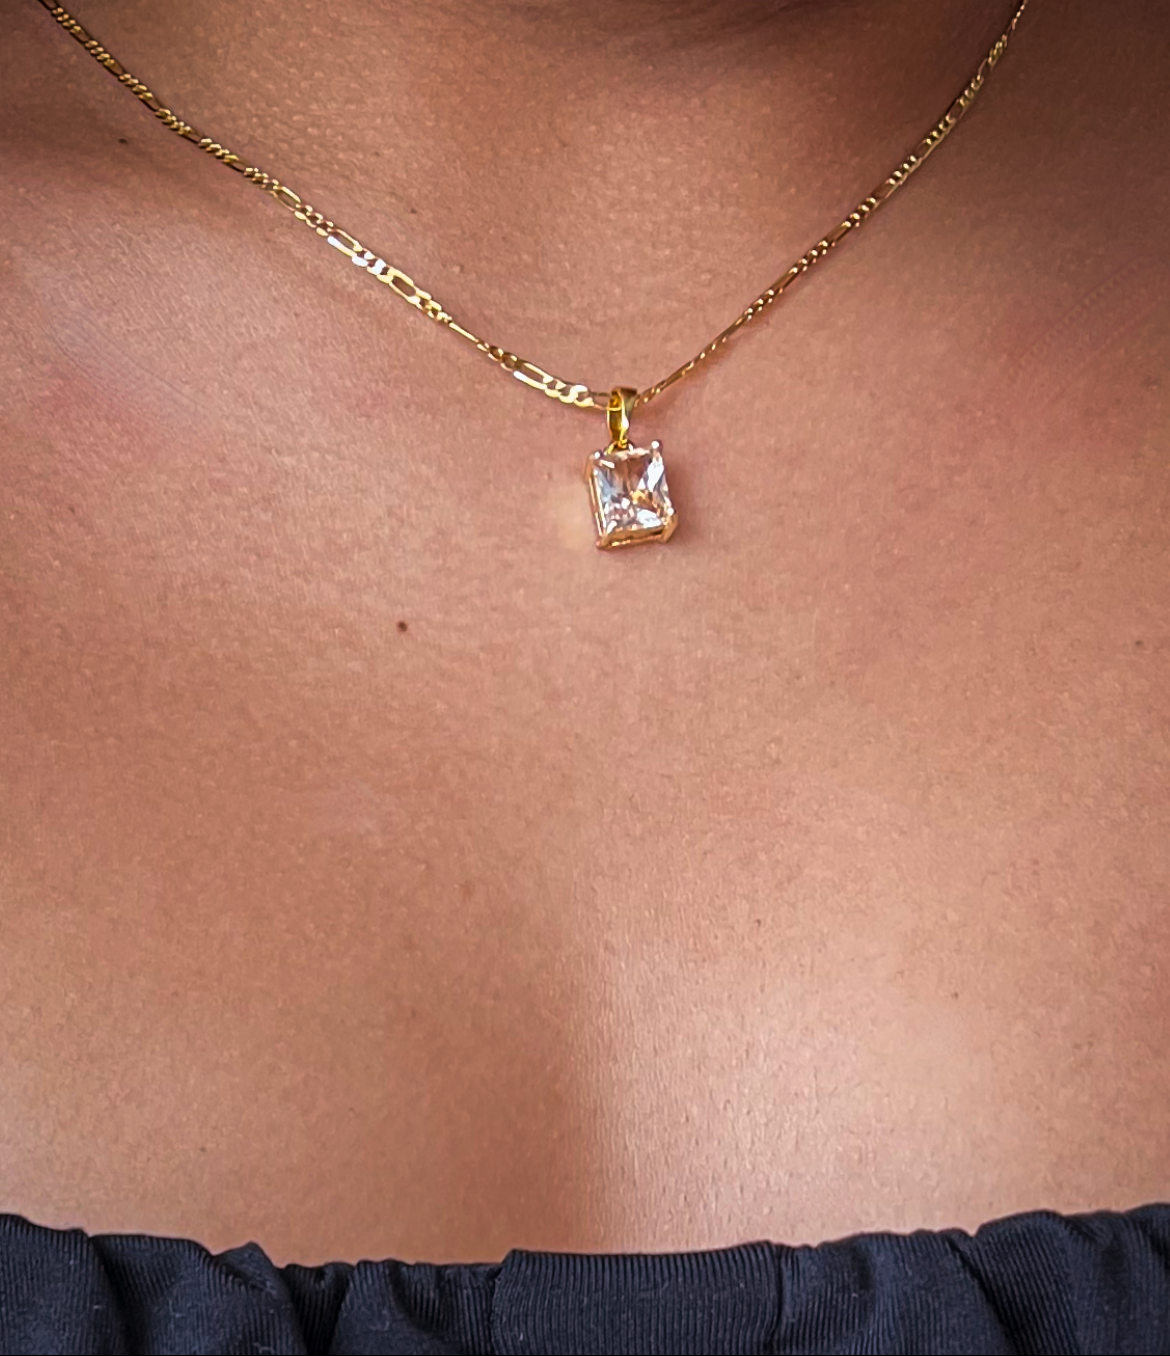 Peach Stone Gold Filled Necklace Gemstone Charm